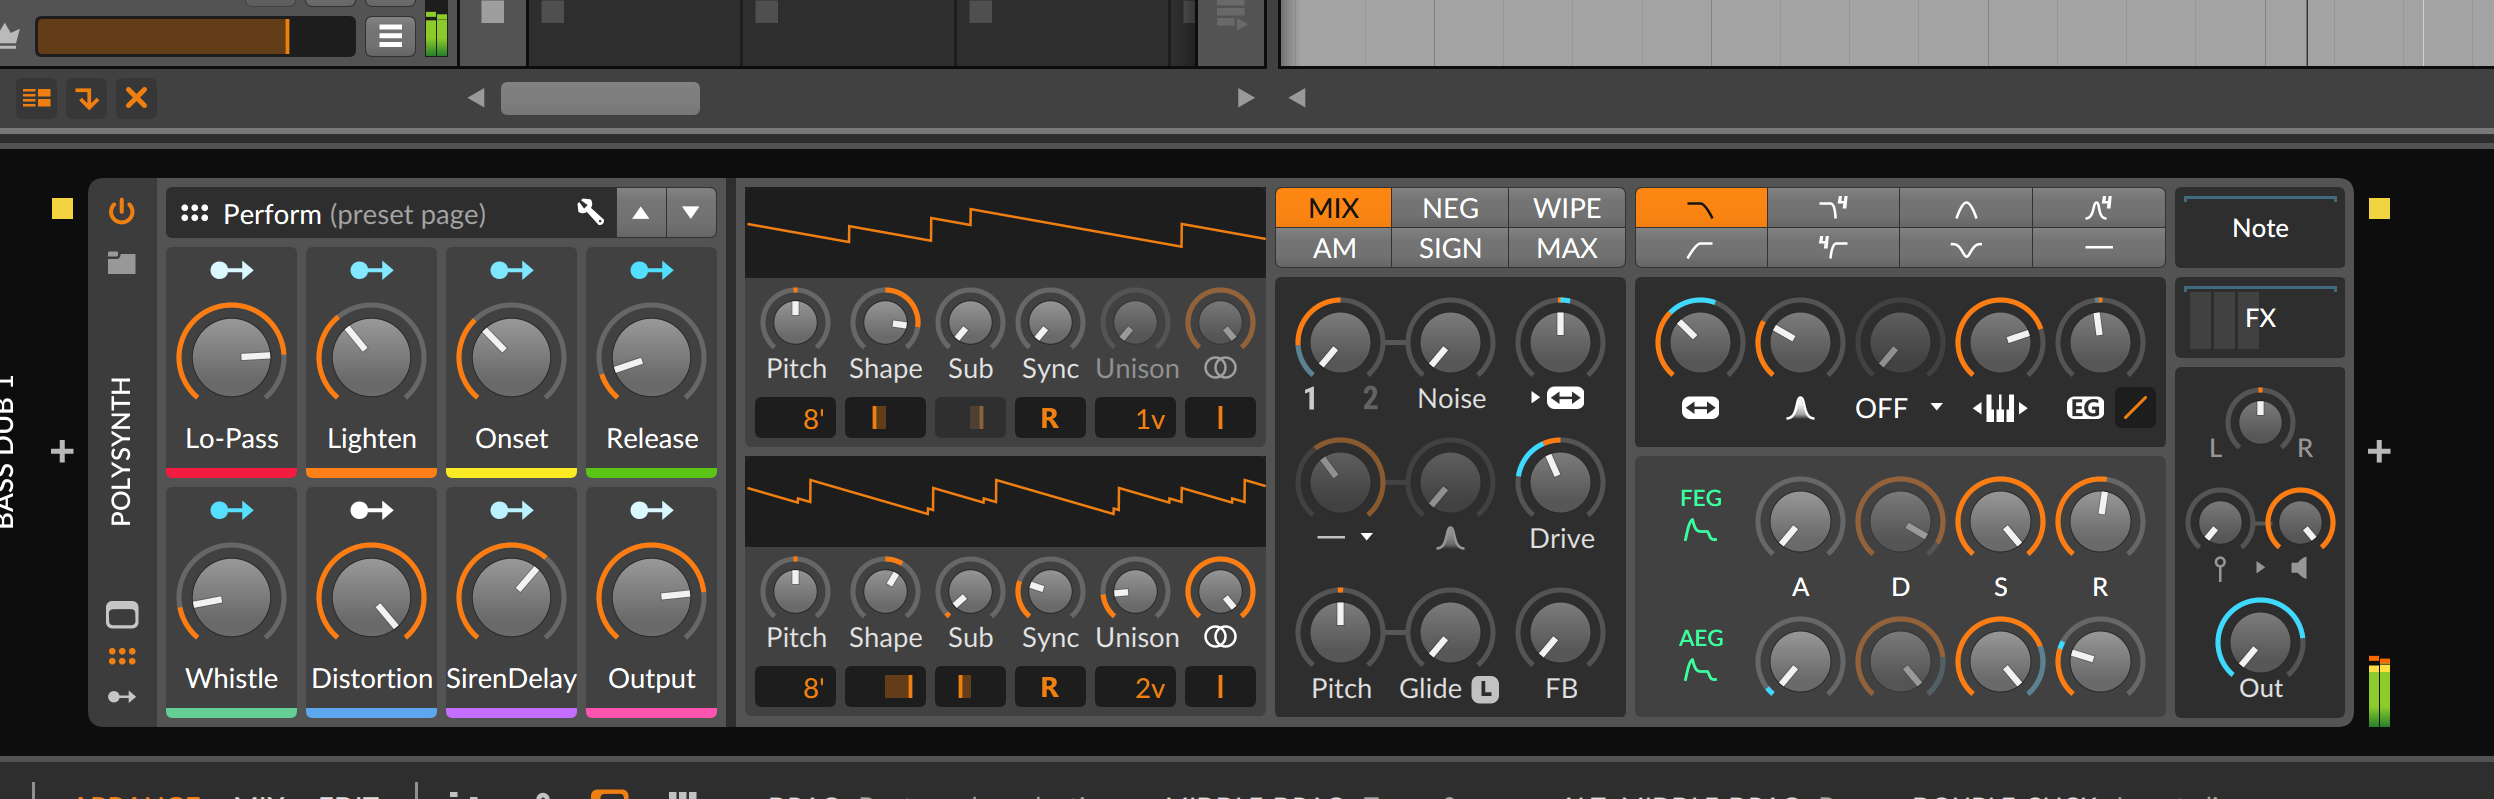 Bitwig Studio Producer (upgrade From Essentials/16 Track) - Sequencer sofware - Variation 2